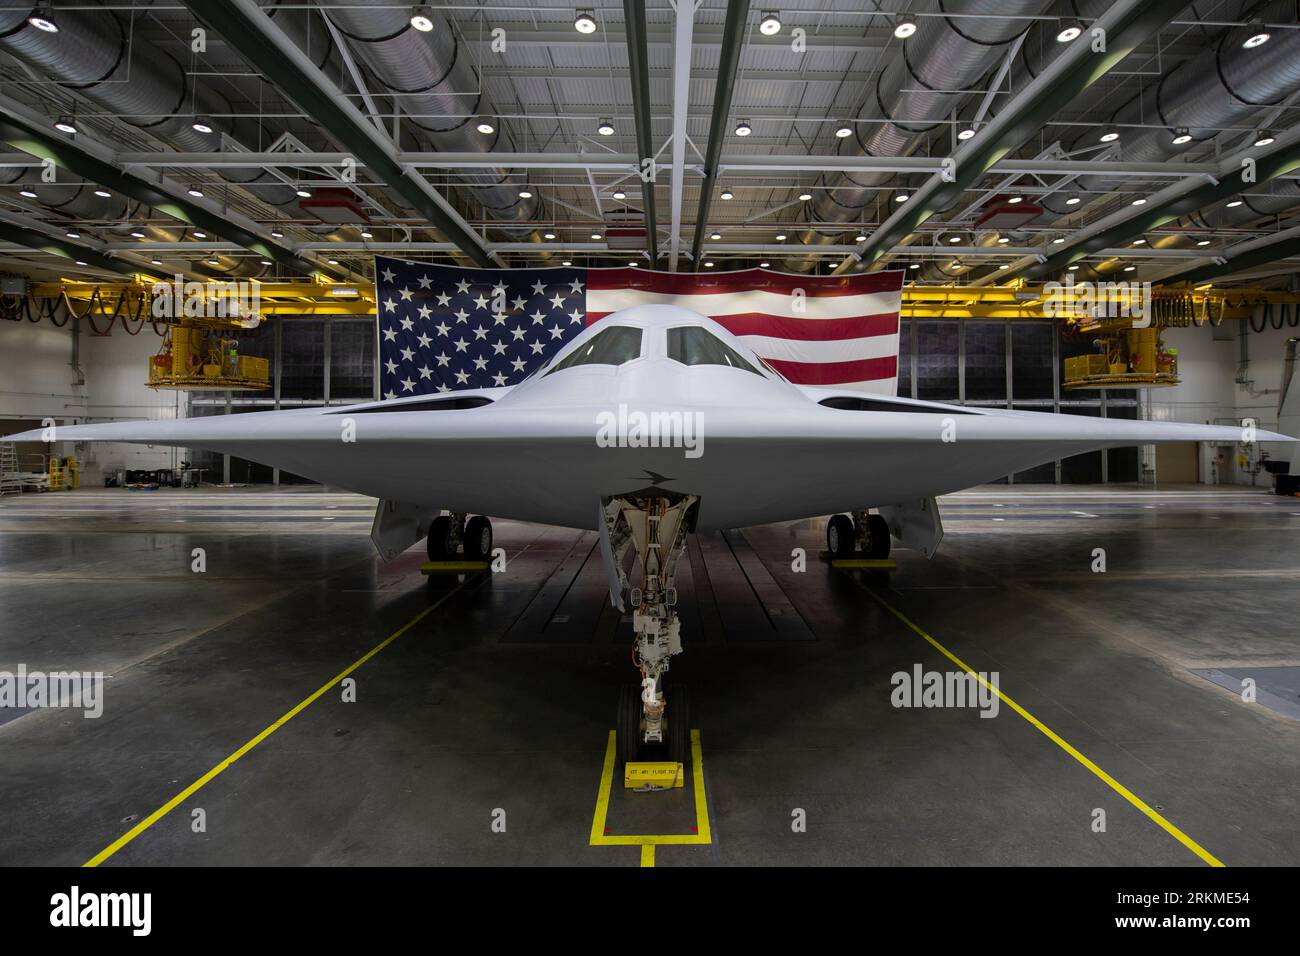 2014 Air Force Year in Photos > Edwards Air Force Base > News